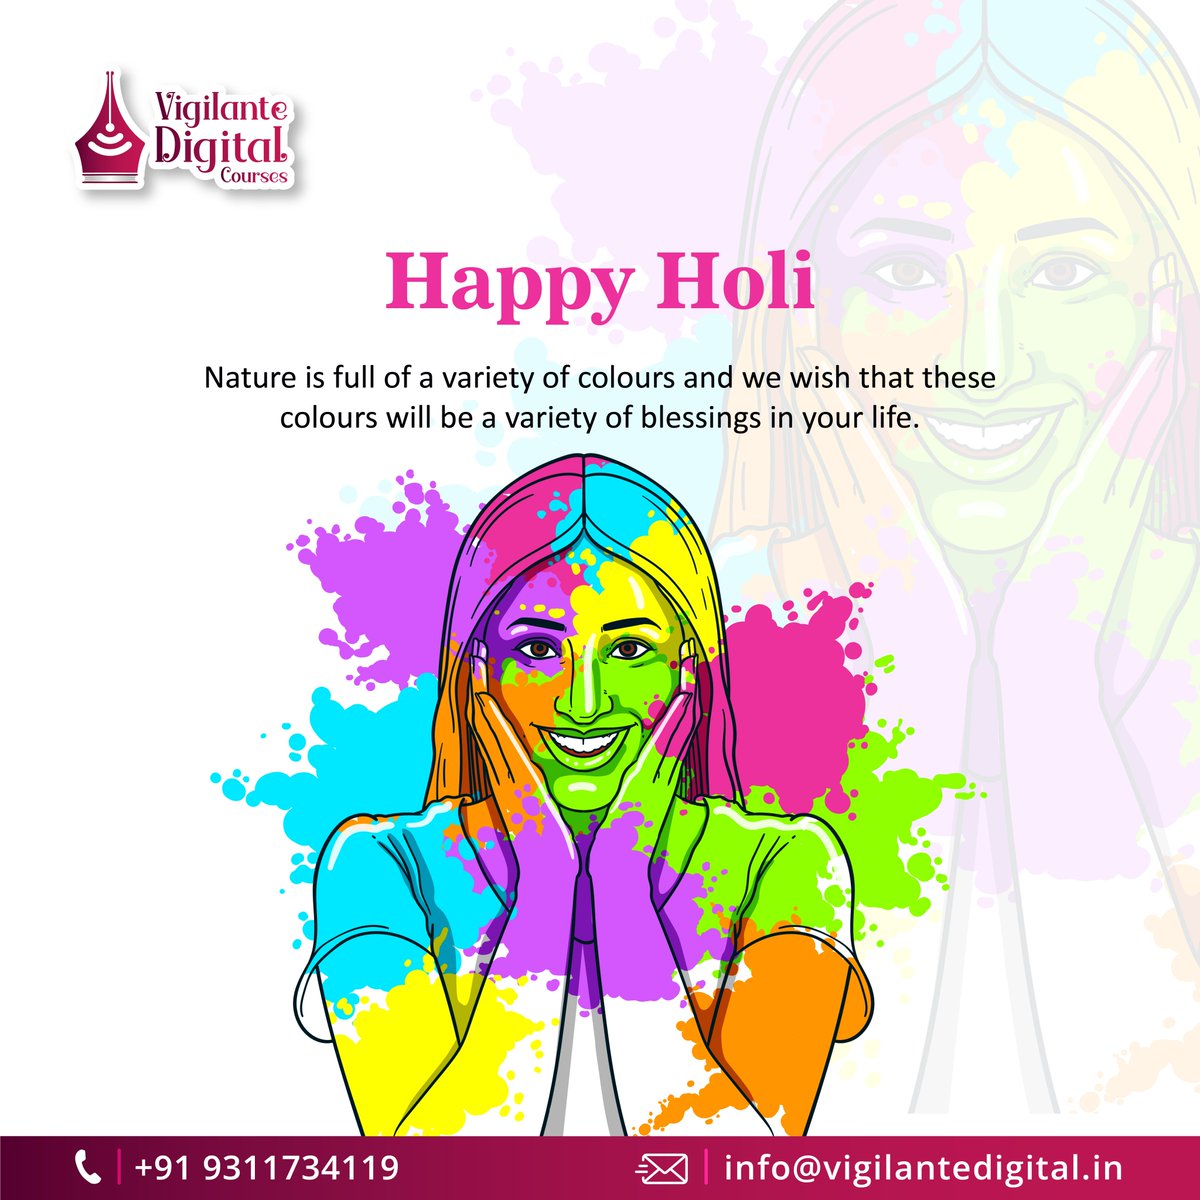 Happy Holi                
Nature is full of a variety of colours and we wish that these colours will be a variety of blessings in your life. 

#happyholi#colours#joy#happiness#festiveblessings#celebration#festivegifts#colorwater#balloonwater#vigilantedigitalcourses